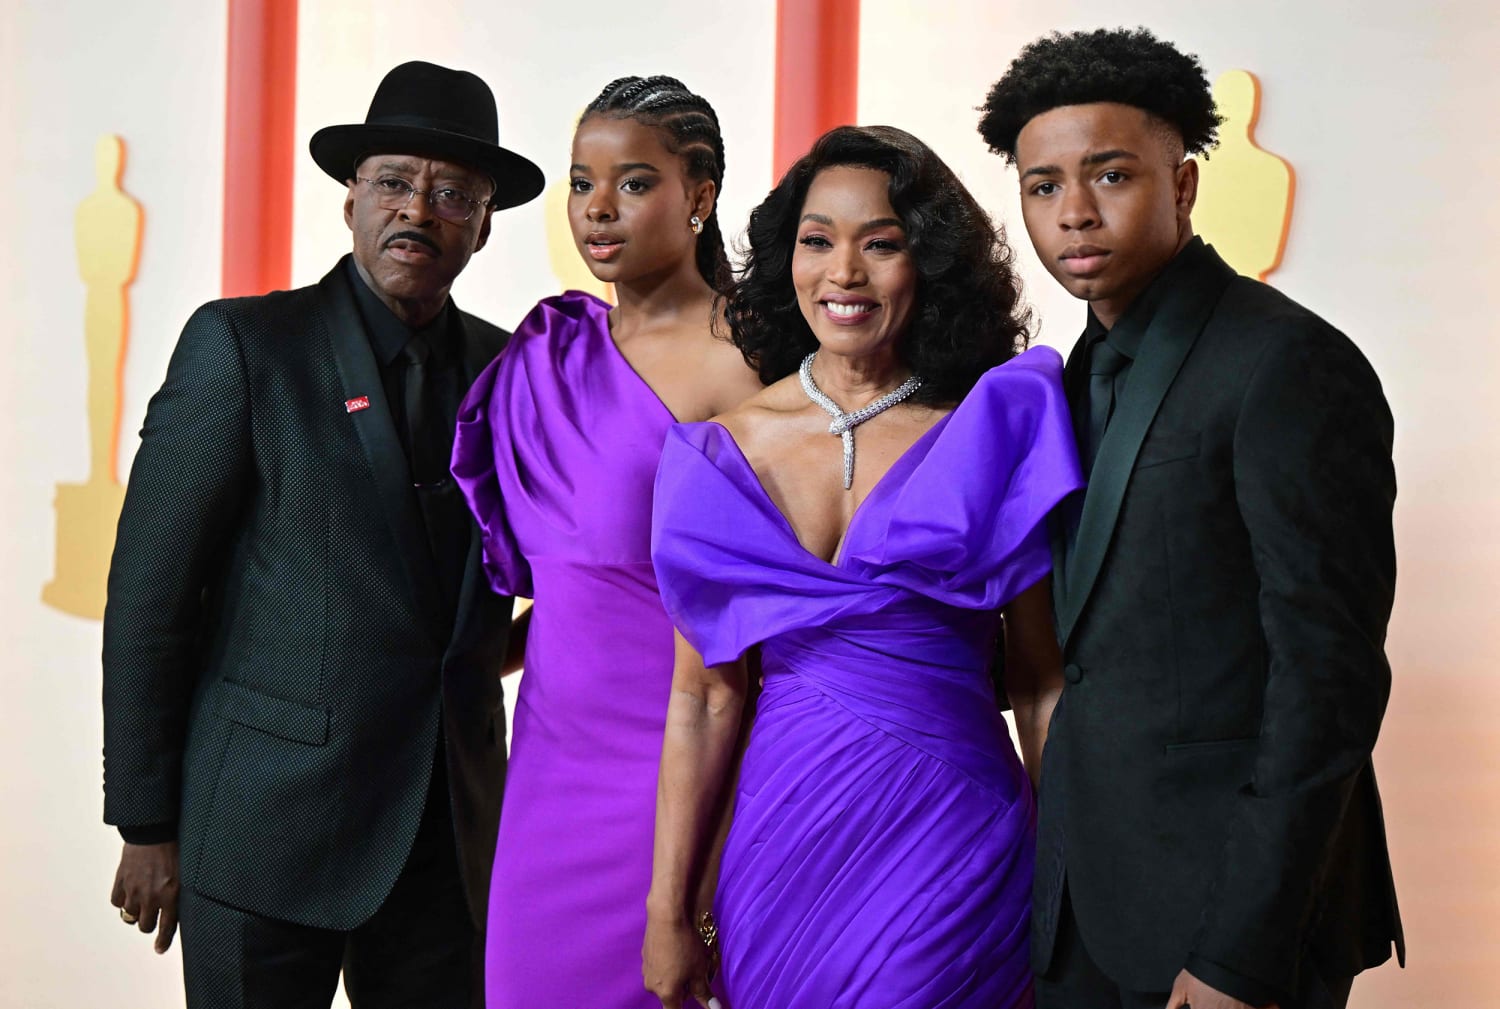 2019 Oscars: See the stars who took their families to the Oscars